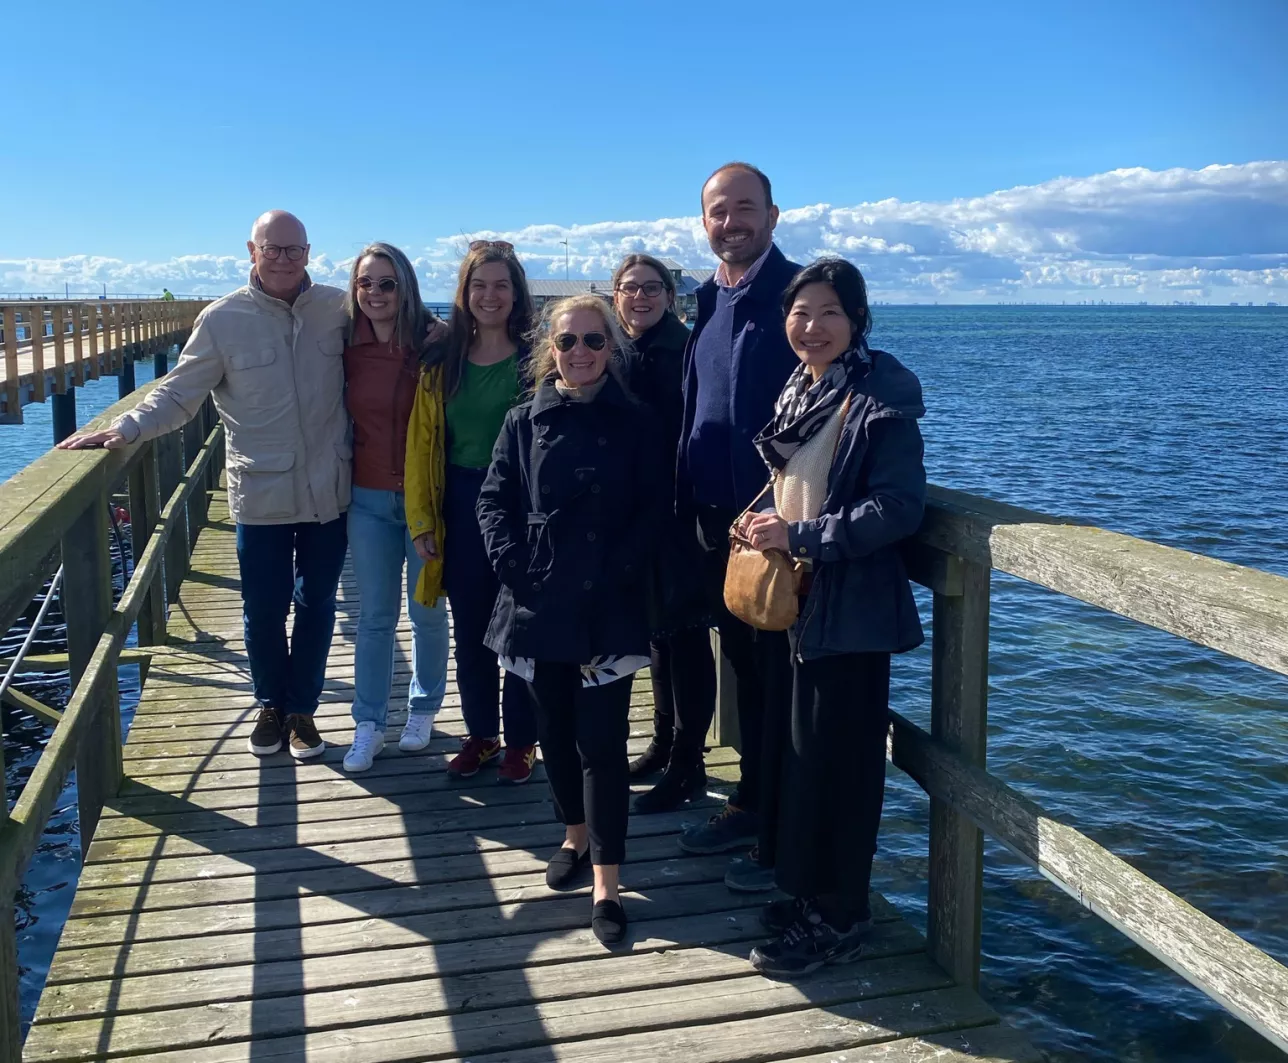 Picture of Urological Cancer groups team members standing on a bridge with ocean view in the background.